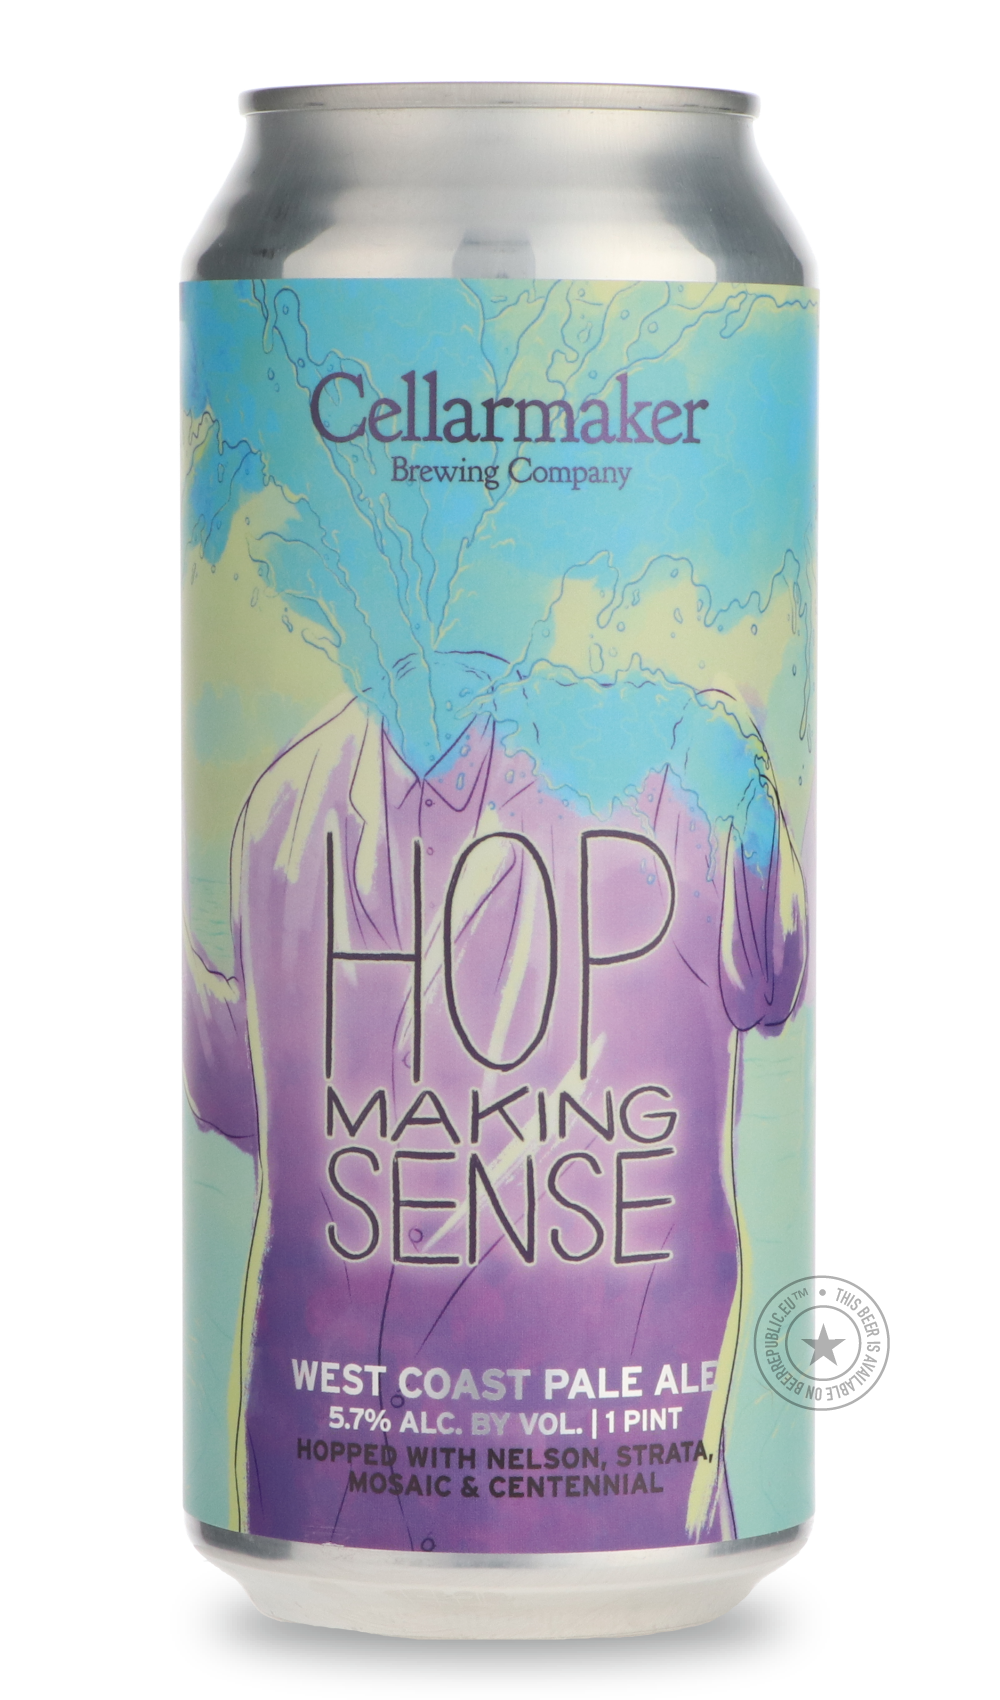 -Cellarmaker- Hop Making Sense-Pale- Only @ Beer Republic - The best online beer store for American & Canadian craft beer - Buy beer online from the USA and Canada - Bier online kopen - Amerikaans bier kopen - Craft beer store - Craft beer kopen - Amerikanisch bier kaufen - Bier online kaufen - Acheter biere online - IPA - Stout - Porter - New England IPA - Hazy IPA - Imperial Stout - Barrel Aged - Barrel Aged Imperial Stout - Brown - Dark beer - Blond - Blonde - Pilsner - Lager - Wheat - Weizen - Amber - B